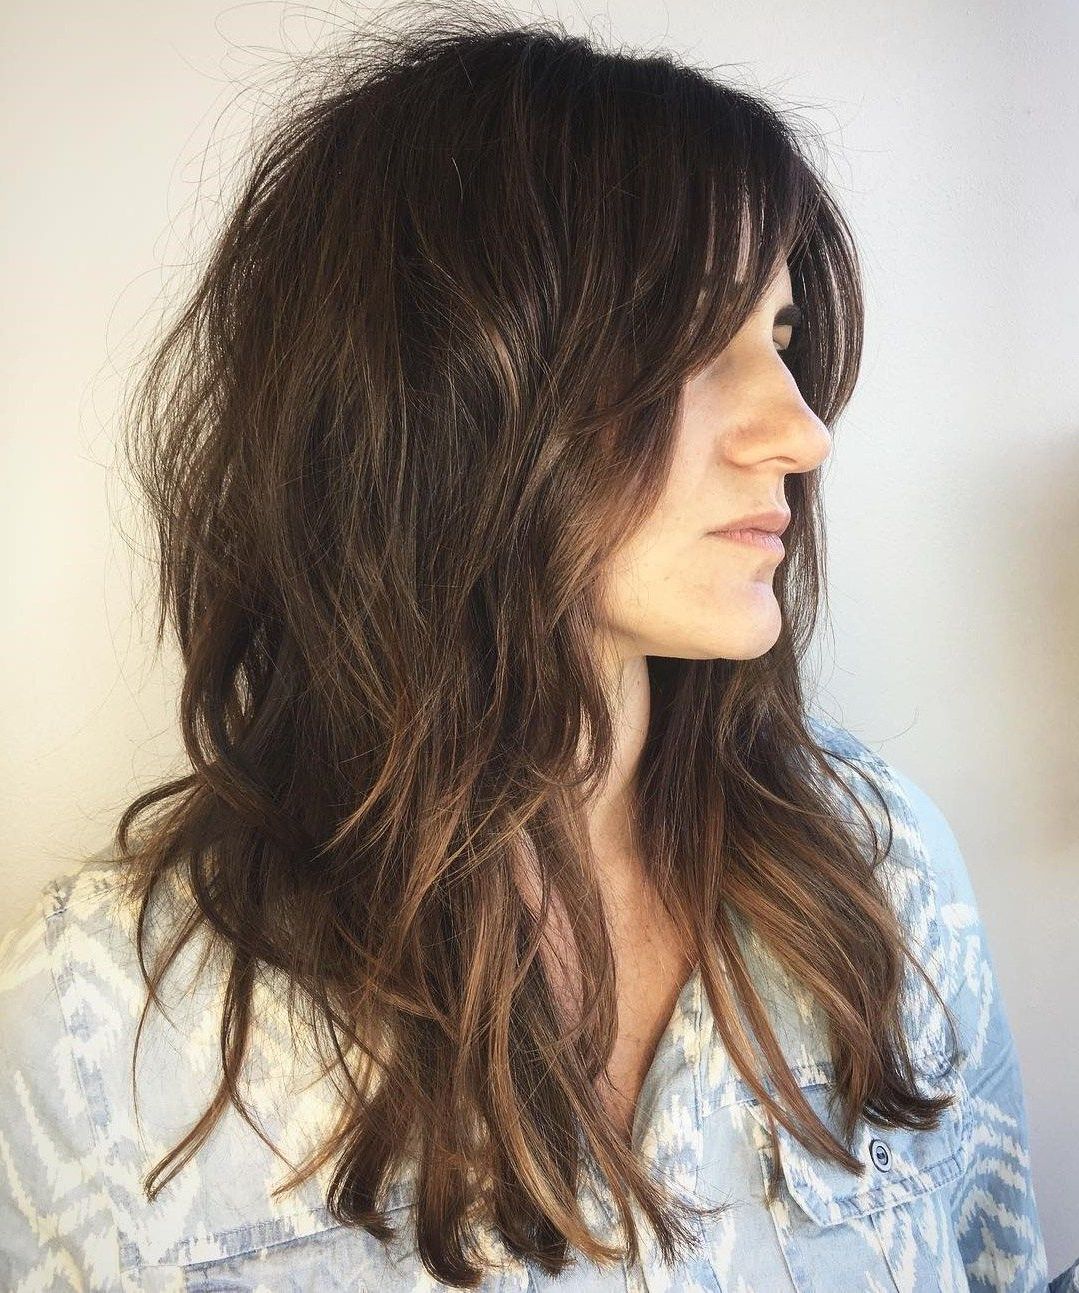 60 Most Universal Modern Shag Haircut Solutions In 2019 For Favorite Long Curly Shag Hairstyles With Bangs (View 13 of 20)